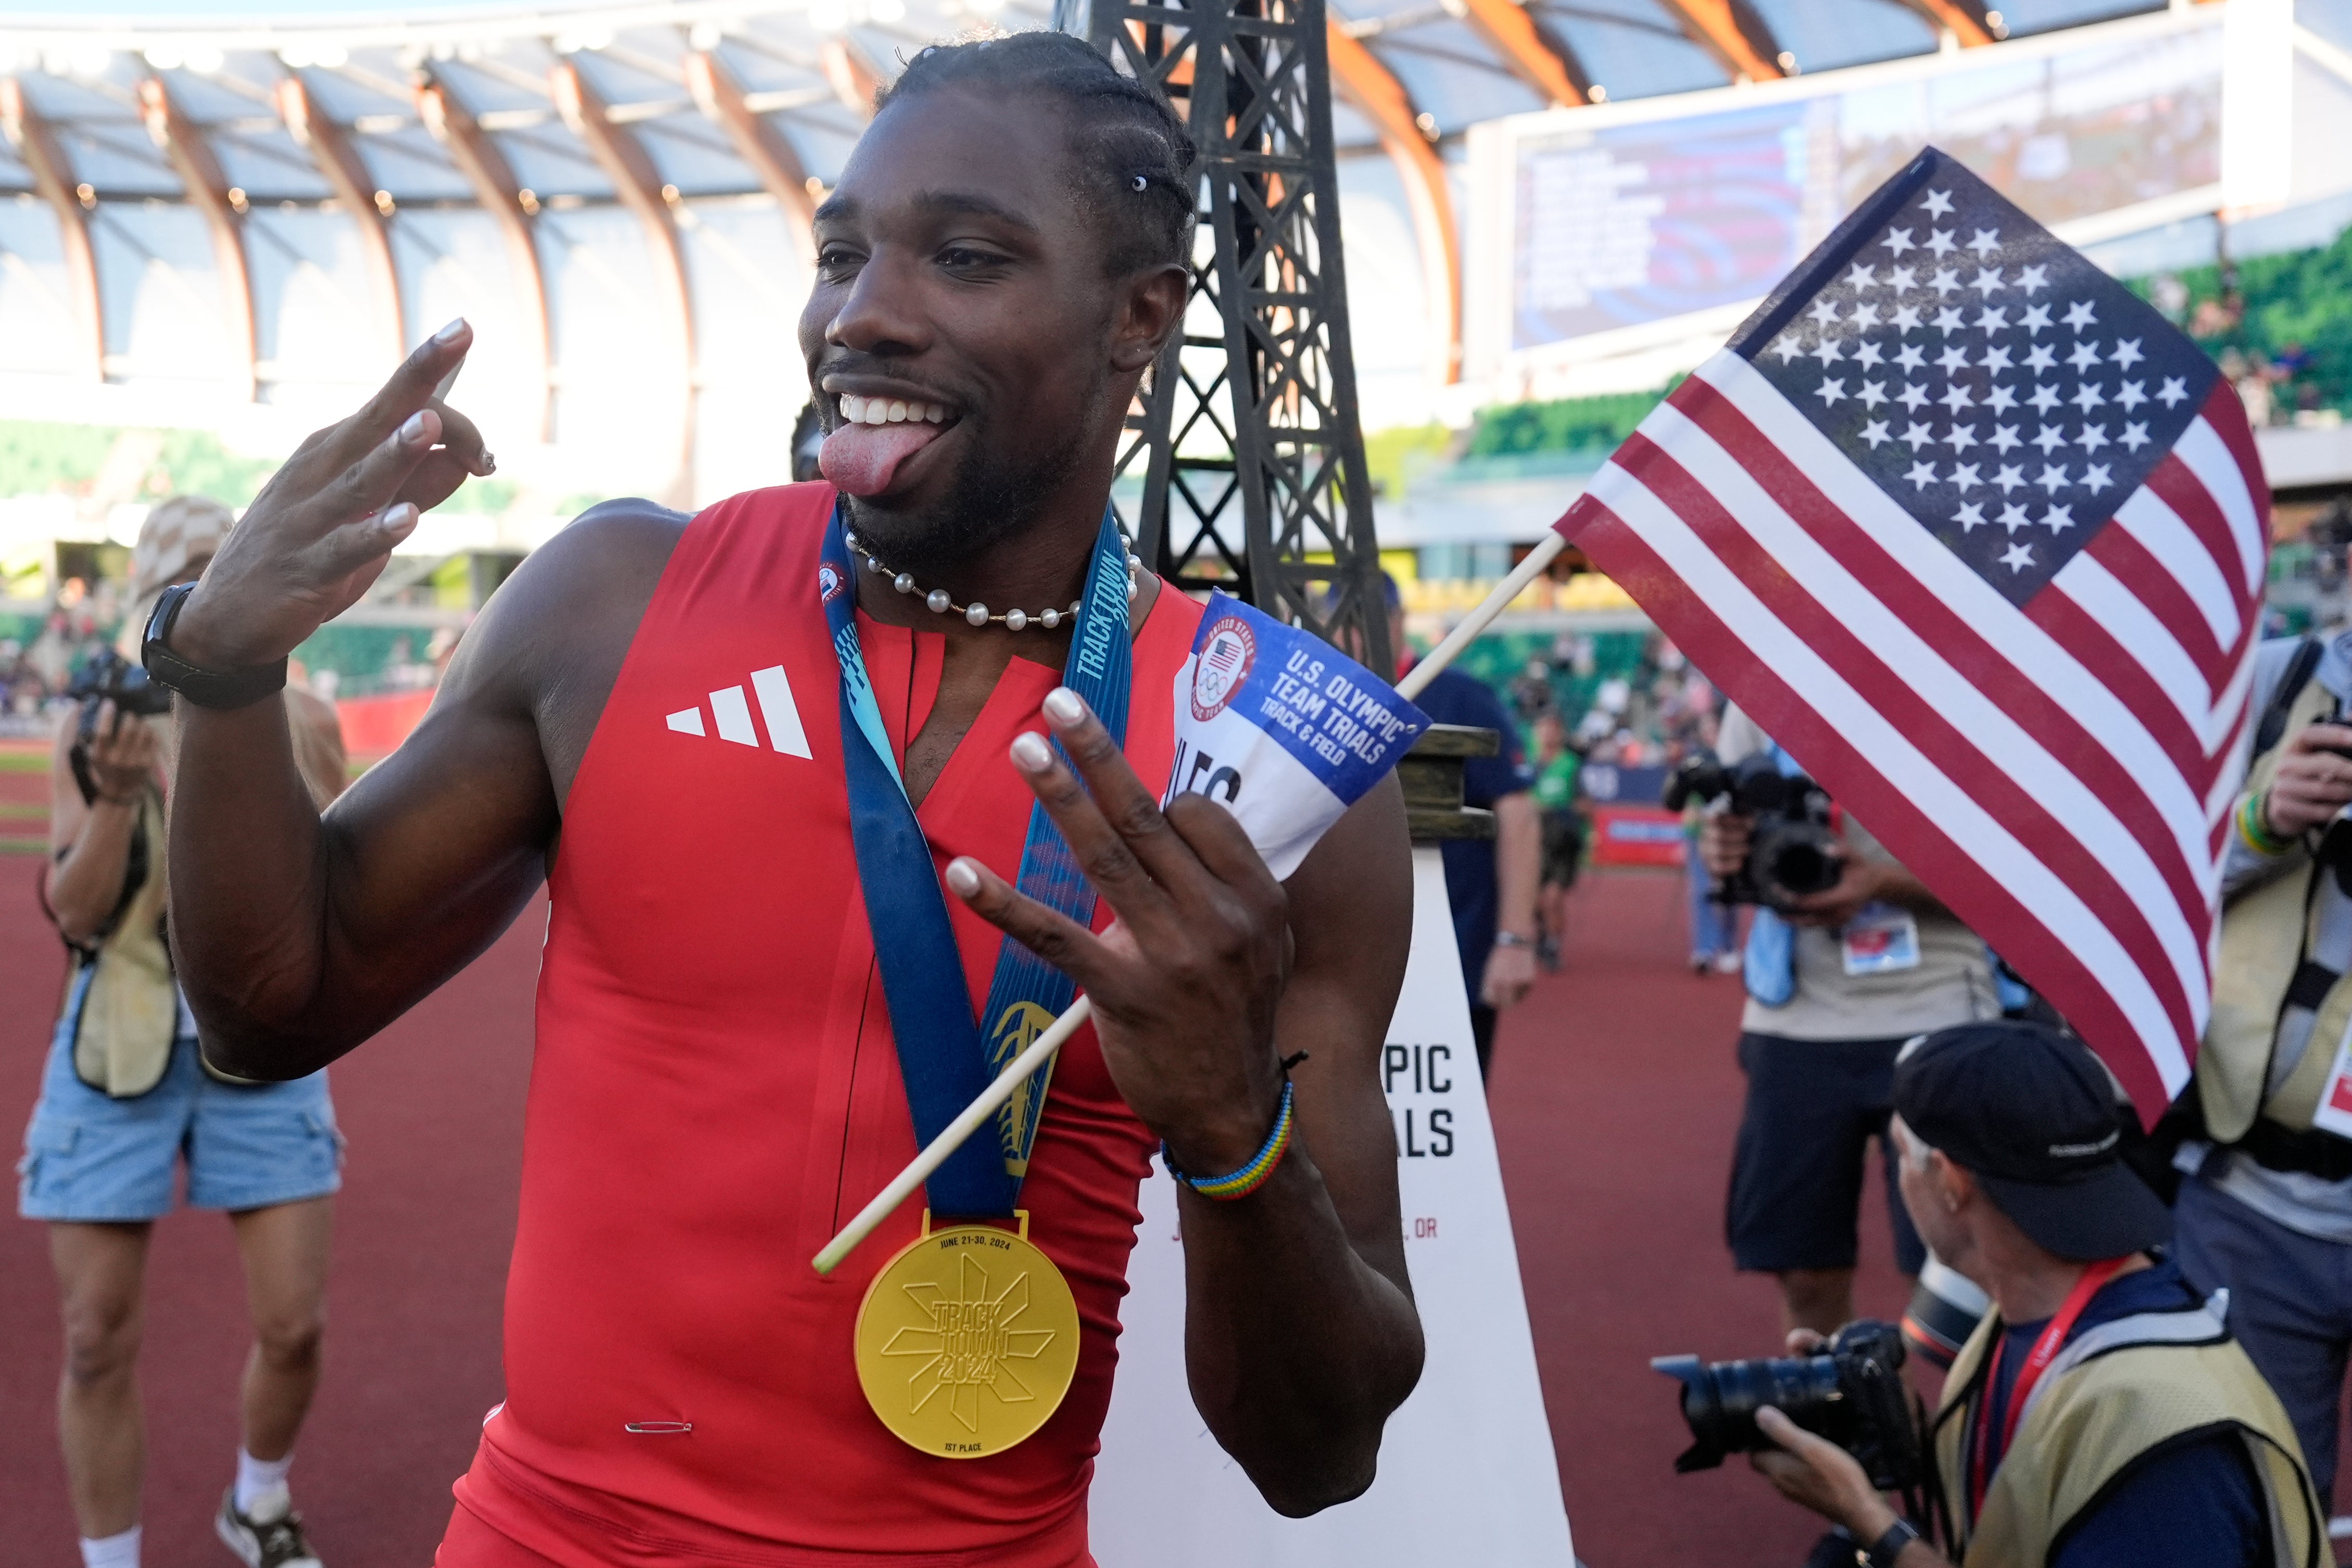 Noah Lyles in June, after winning the men’s 100m final at the US track and field Olympic trials